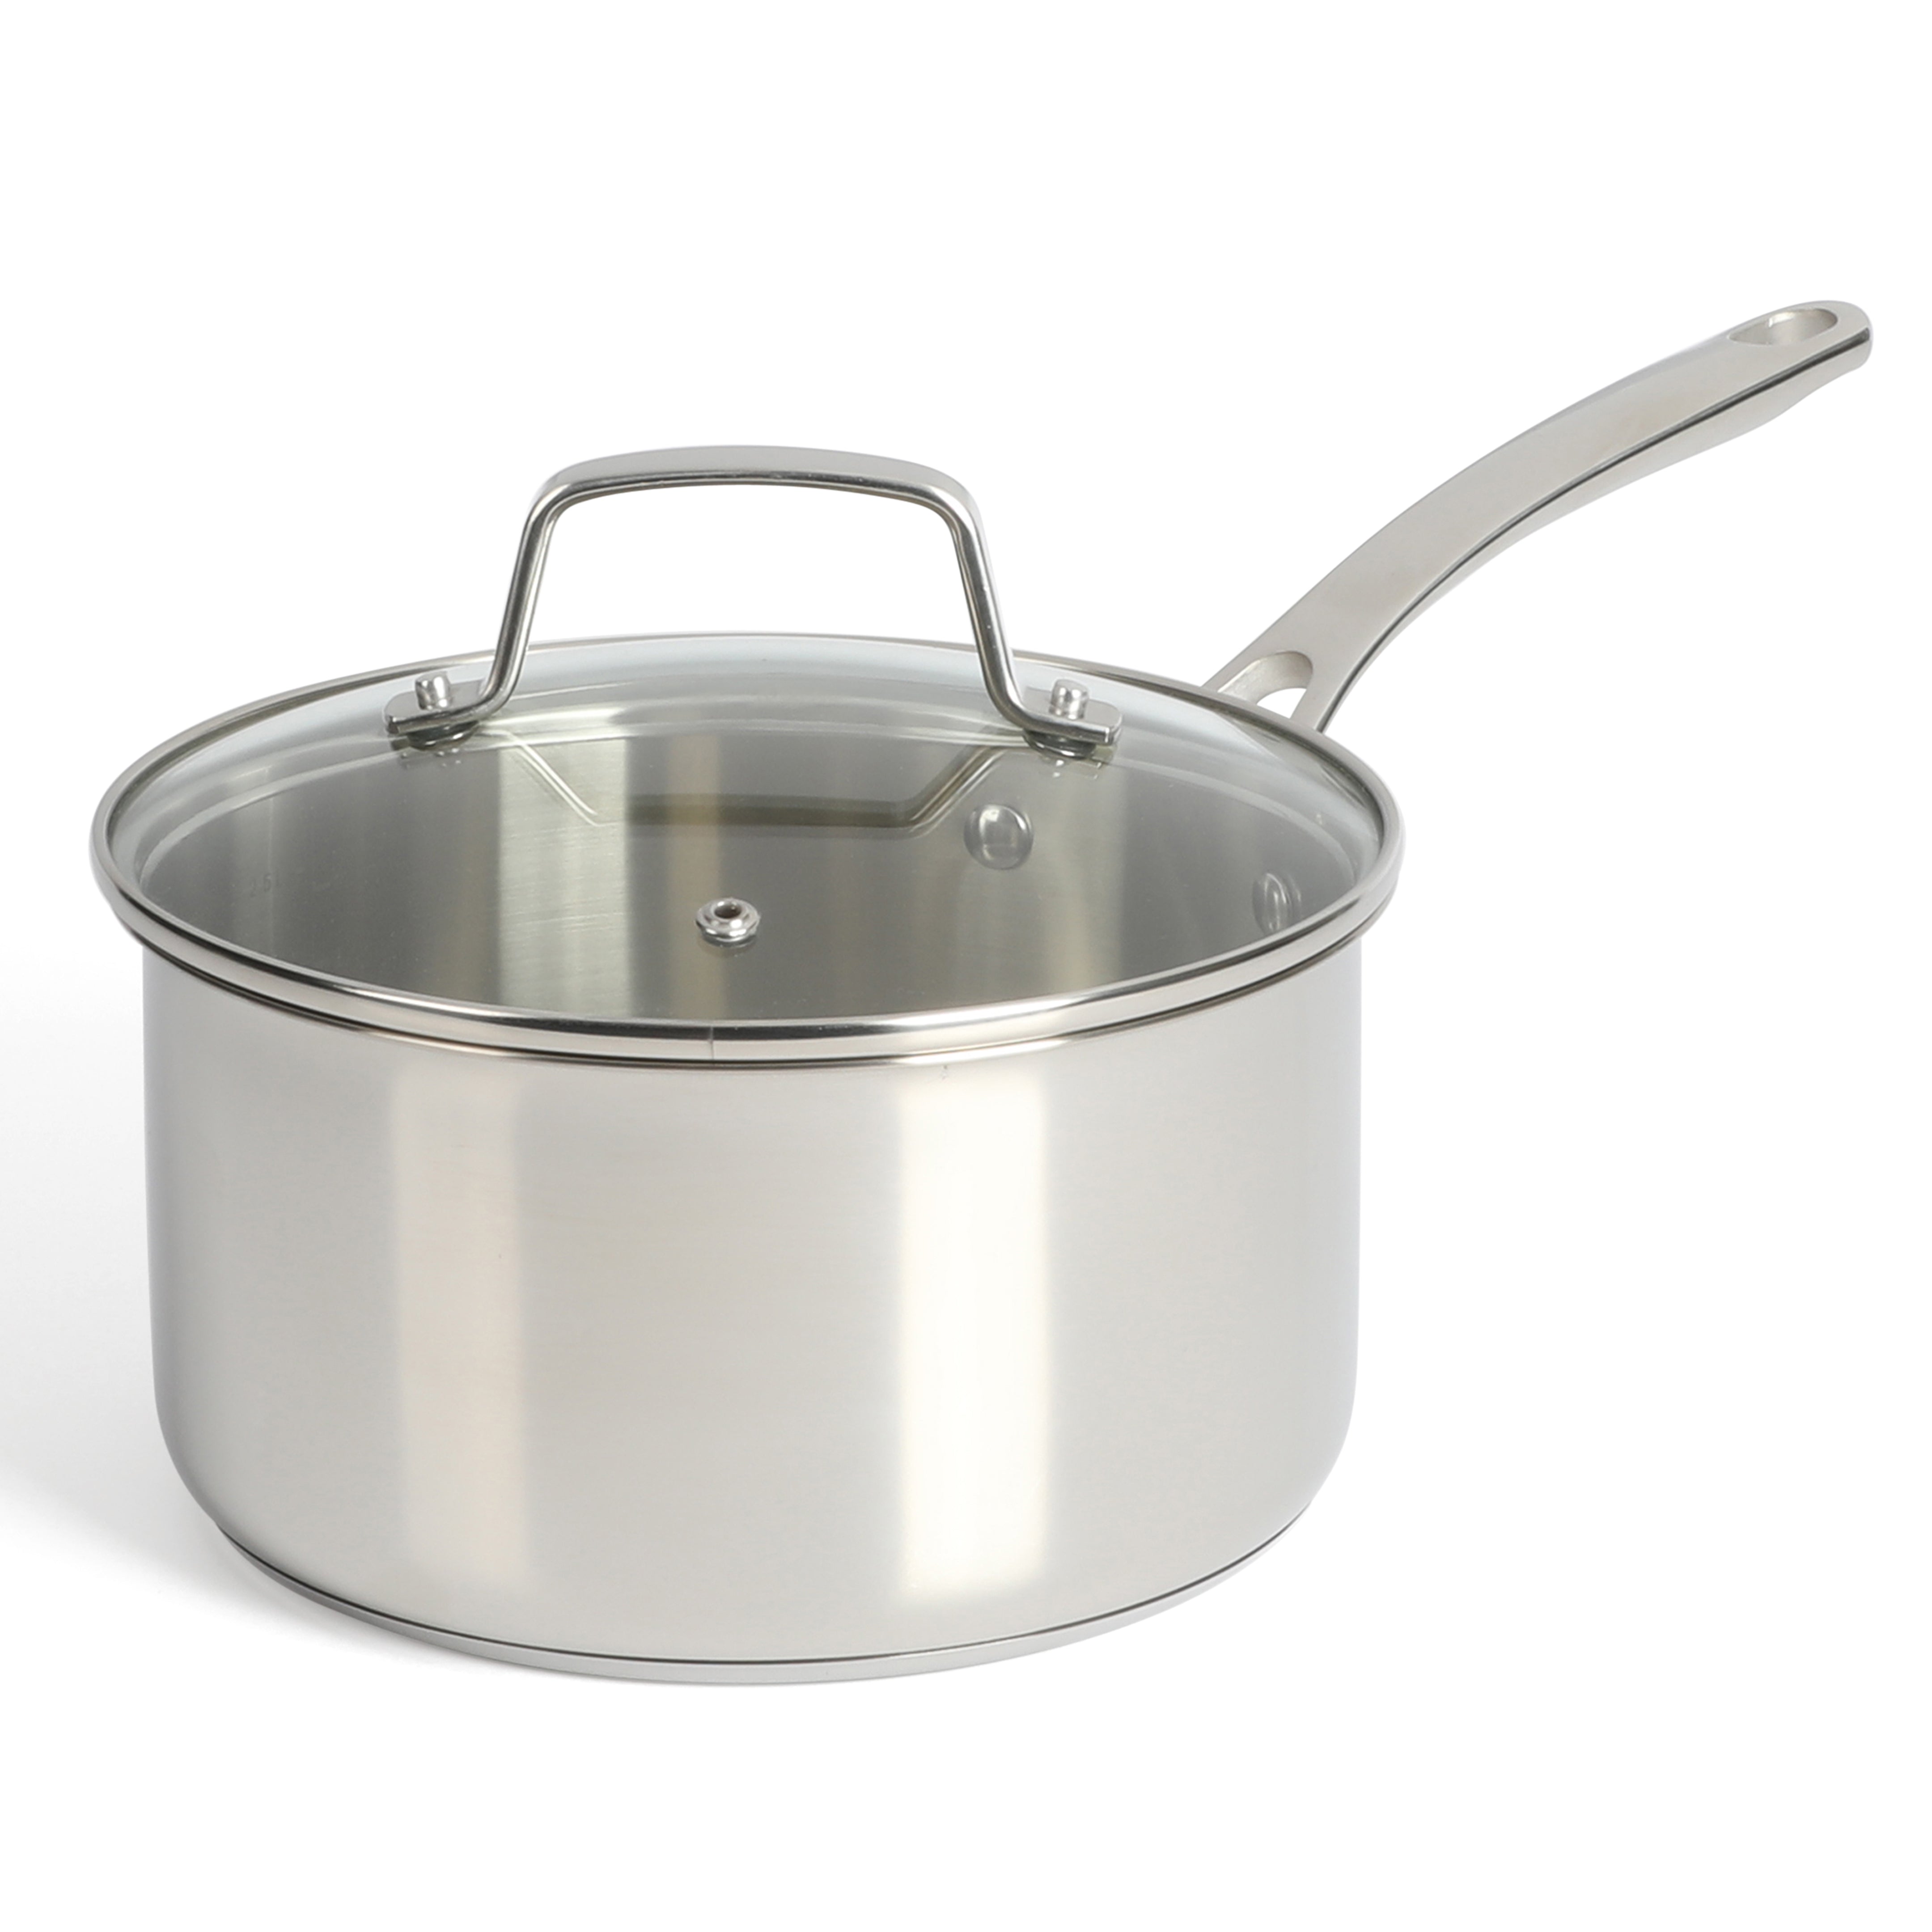 Cook N Home Stainless Steel Saucepan 1.5 Quart, Tri-Ply Full Clad Sauce Pan  with Glass Lid, Silver